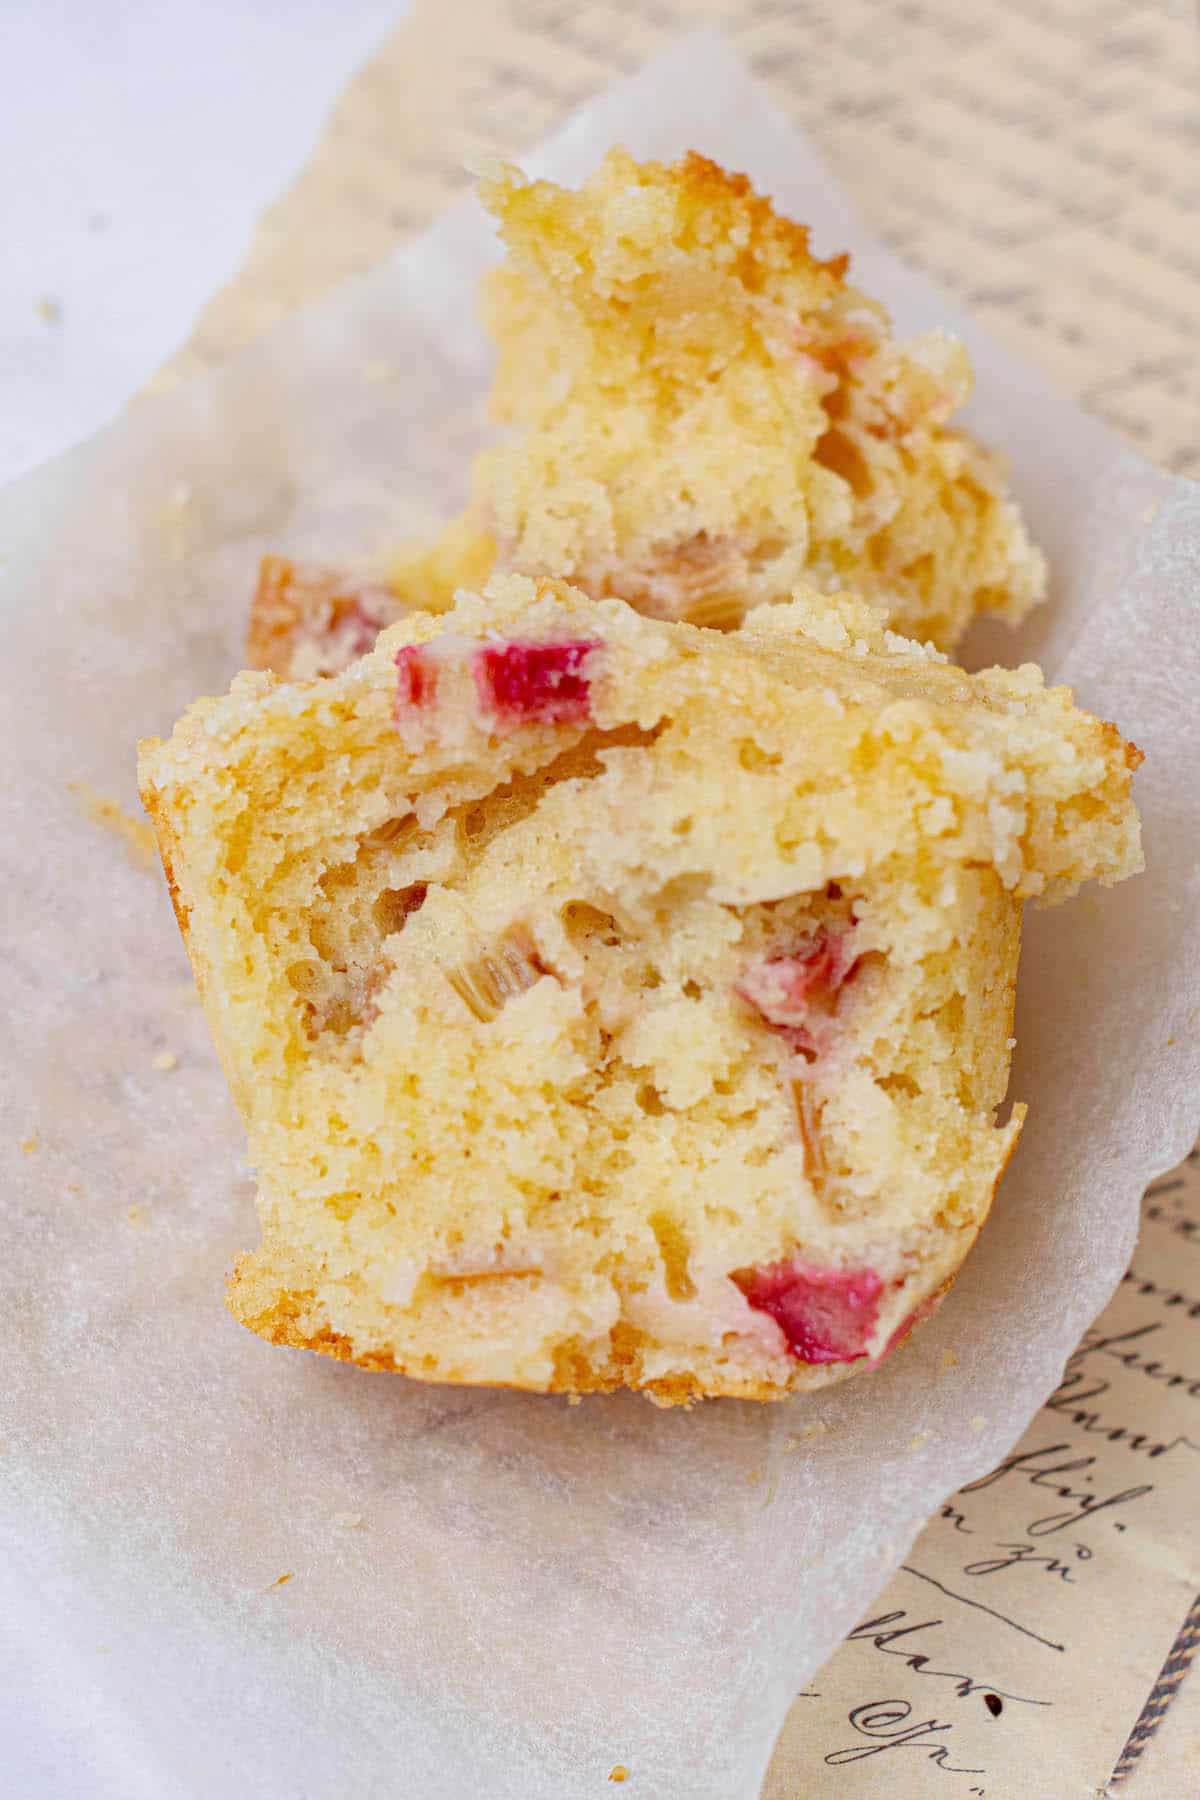 halved muffin with lots of rhubarb pieces showing.